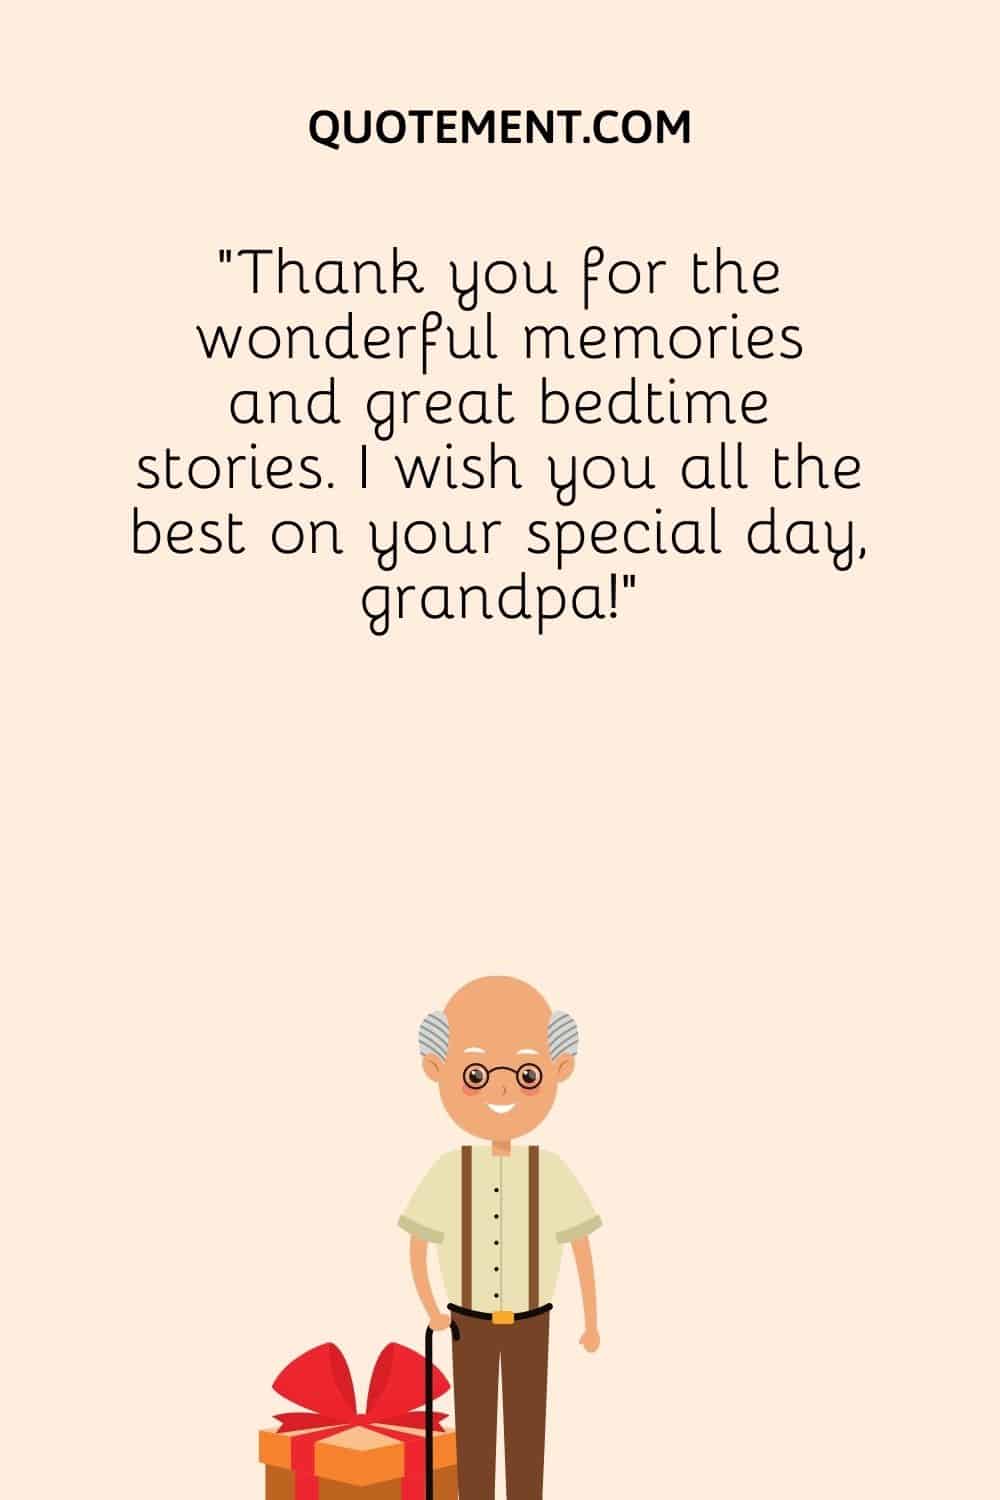 Thank you for the wonderful memories and great bedtime stories